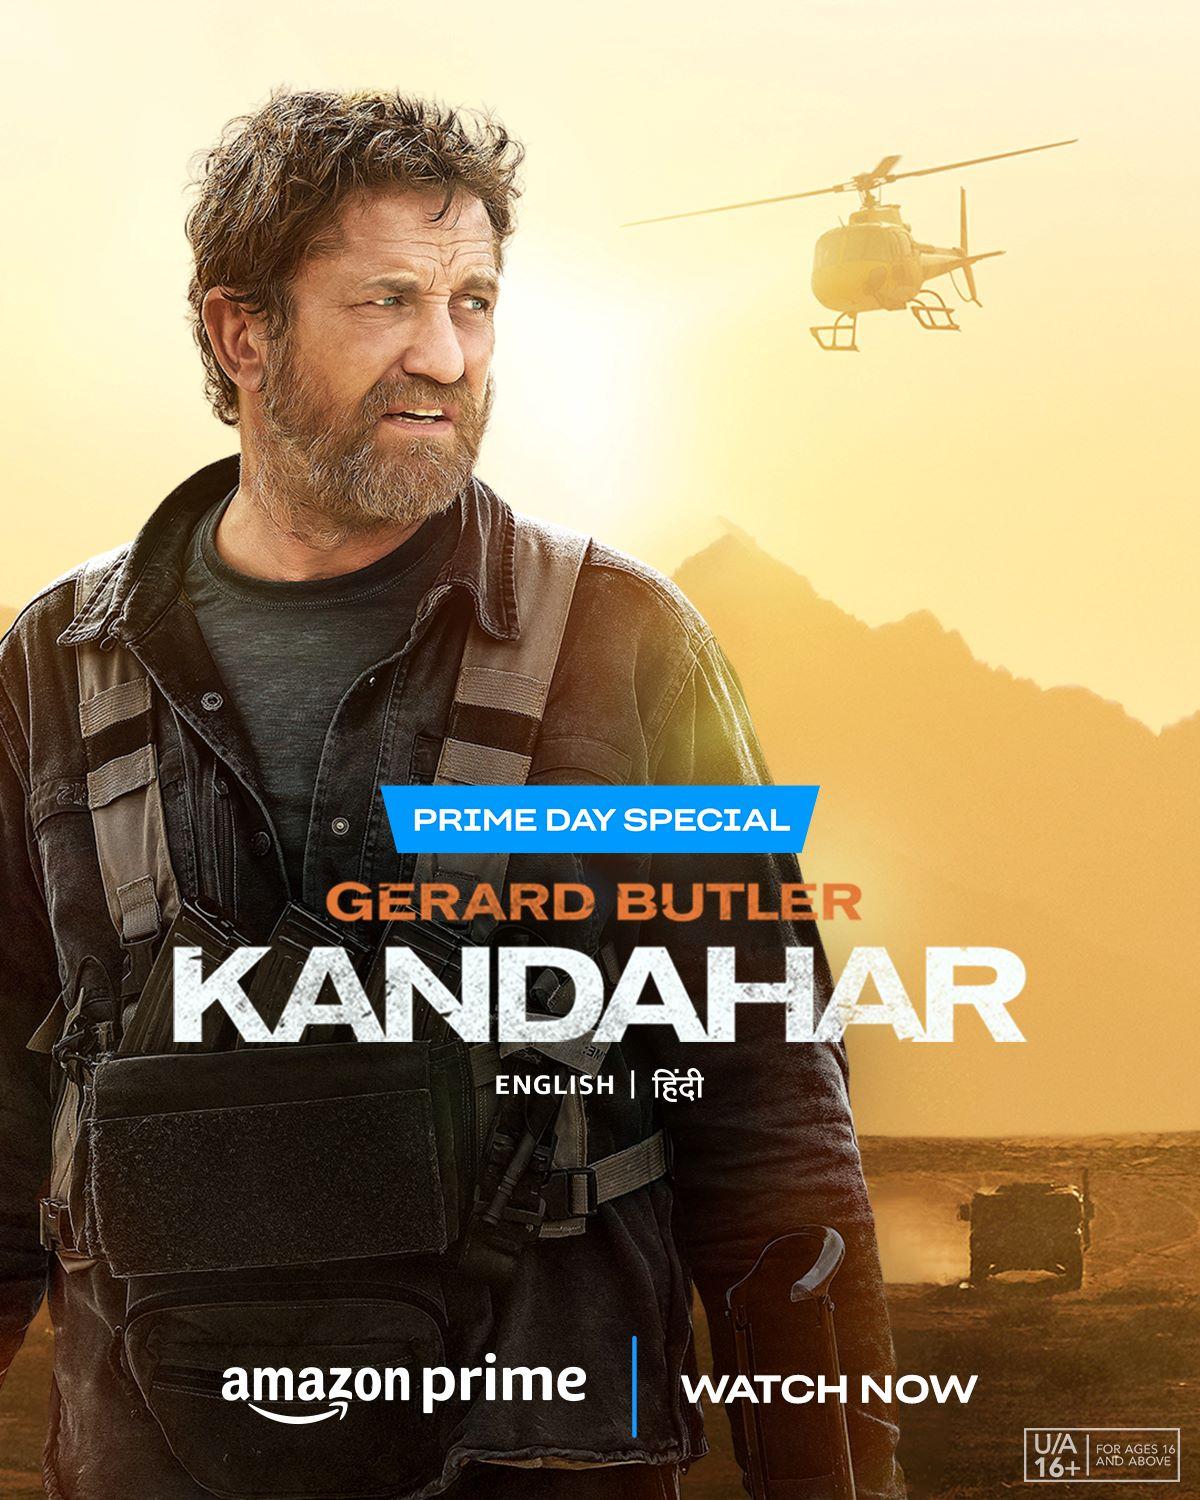 Thrill seekers unite, Kandahar, featuring captivating performances by Gerald Butler and Ali Faizal, is available on Amazon Prime to watch anytime, anywhere.